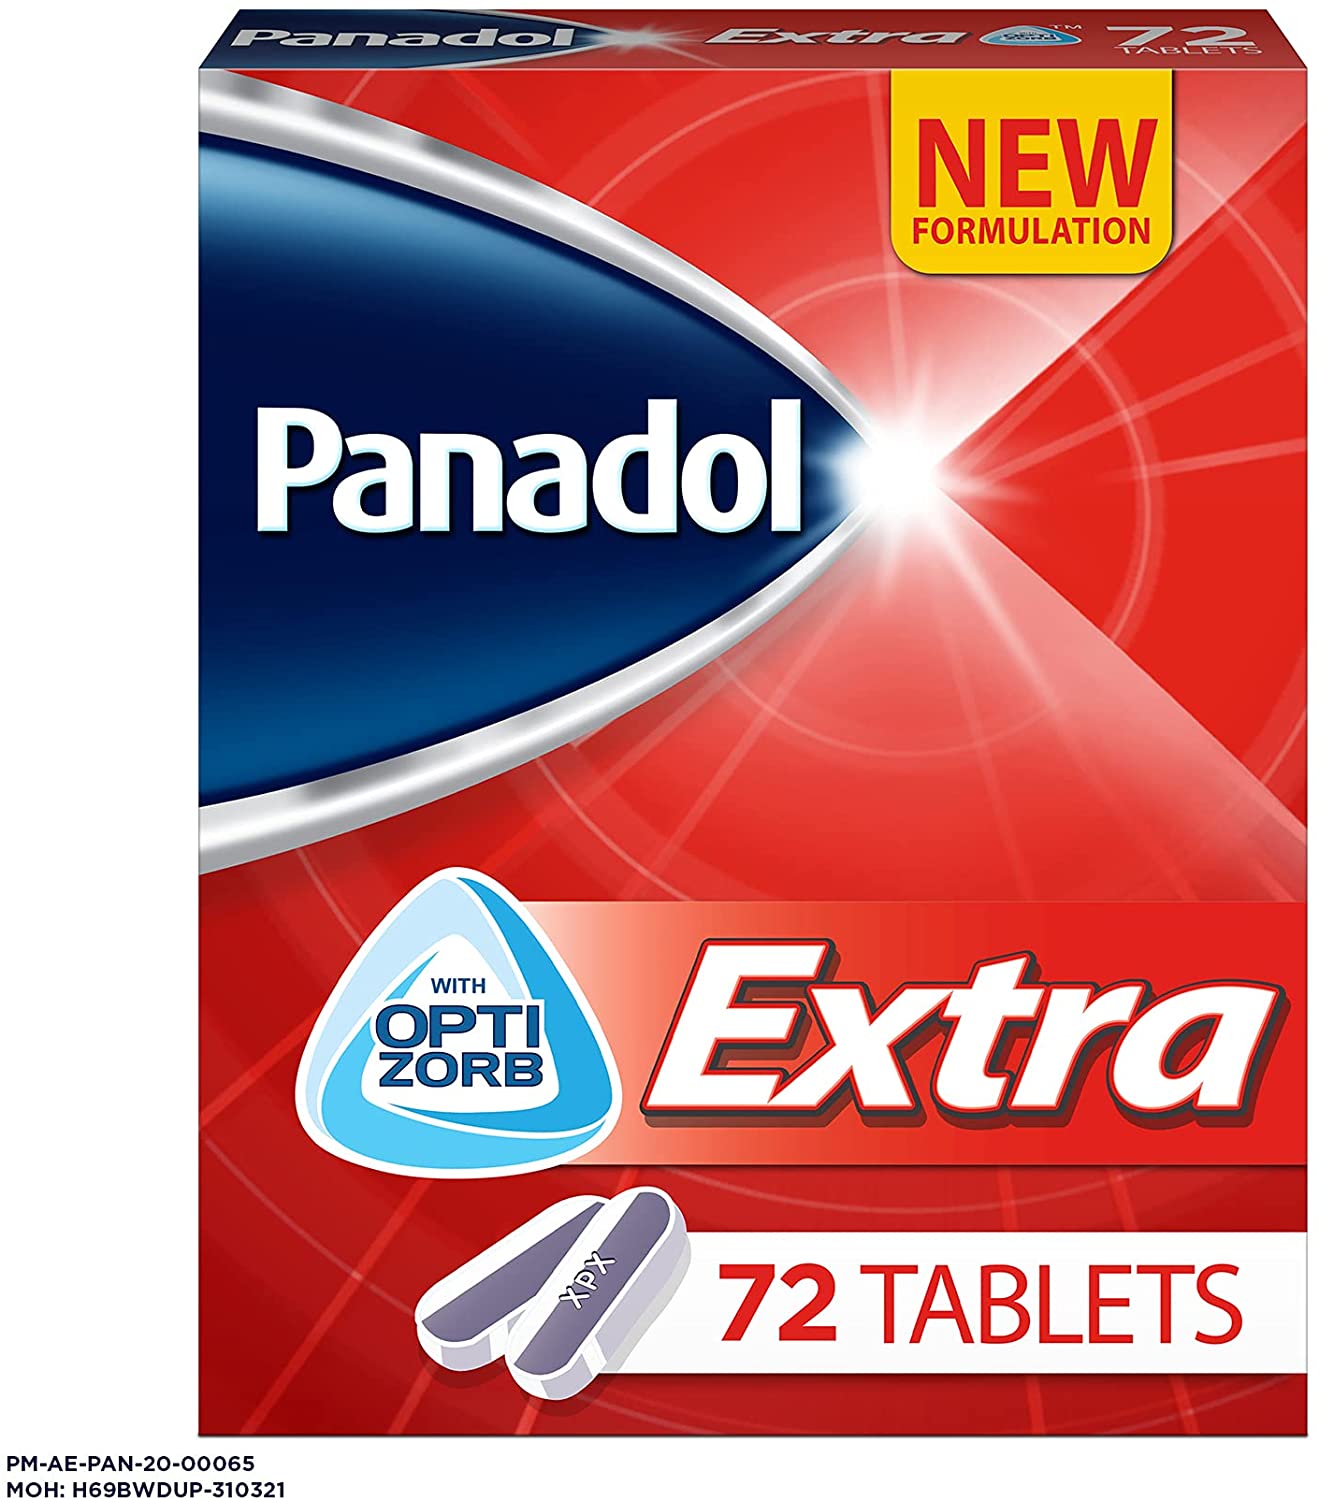 Panadol Extra with Optizorb for Pain Relief for Migraines, Headaches, Toothaches & Period Pain, 72 Tablets